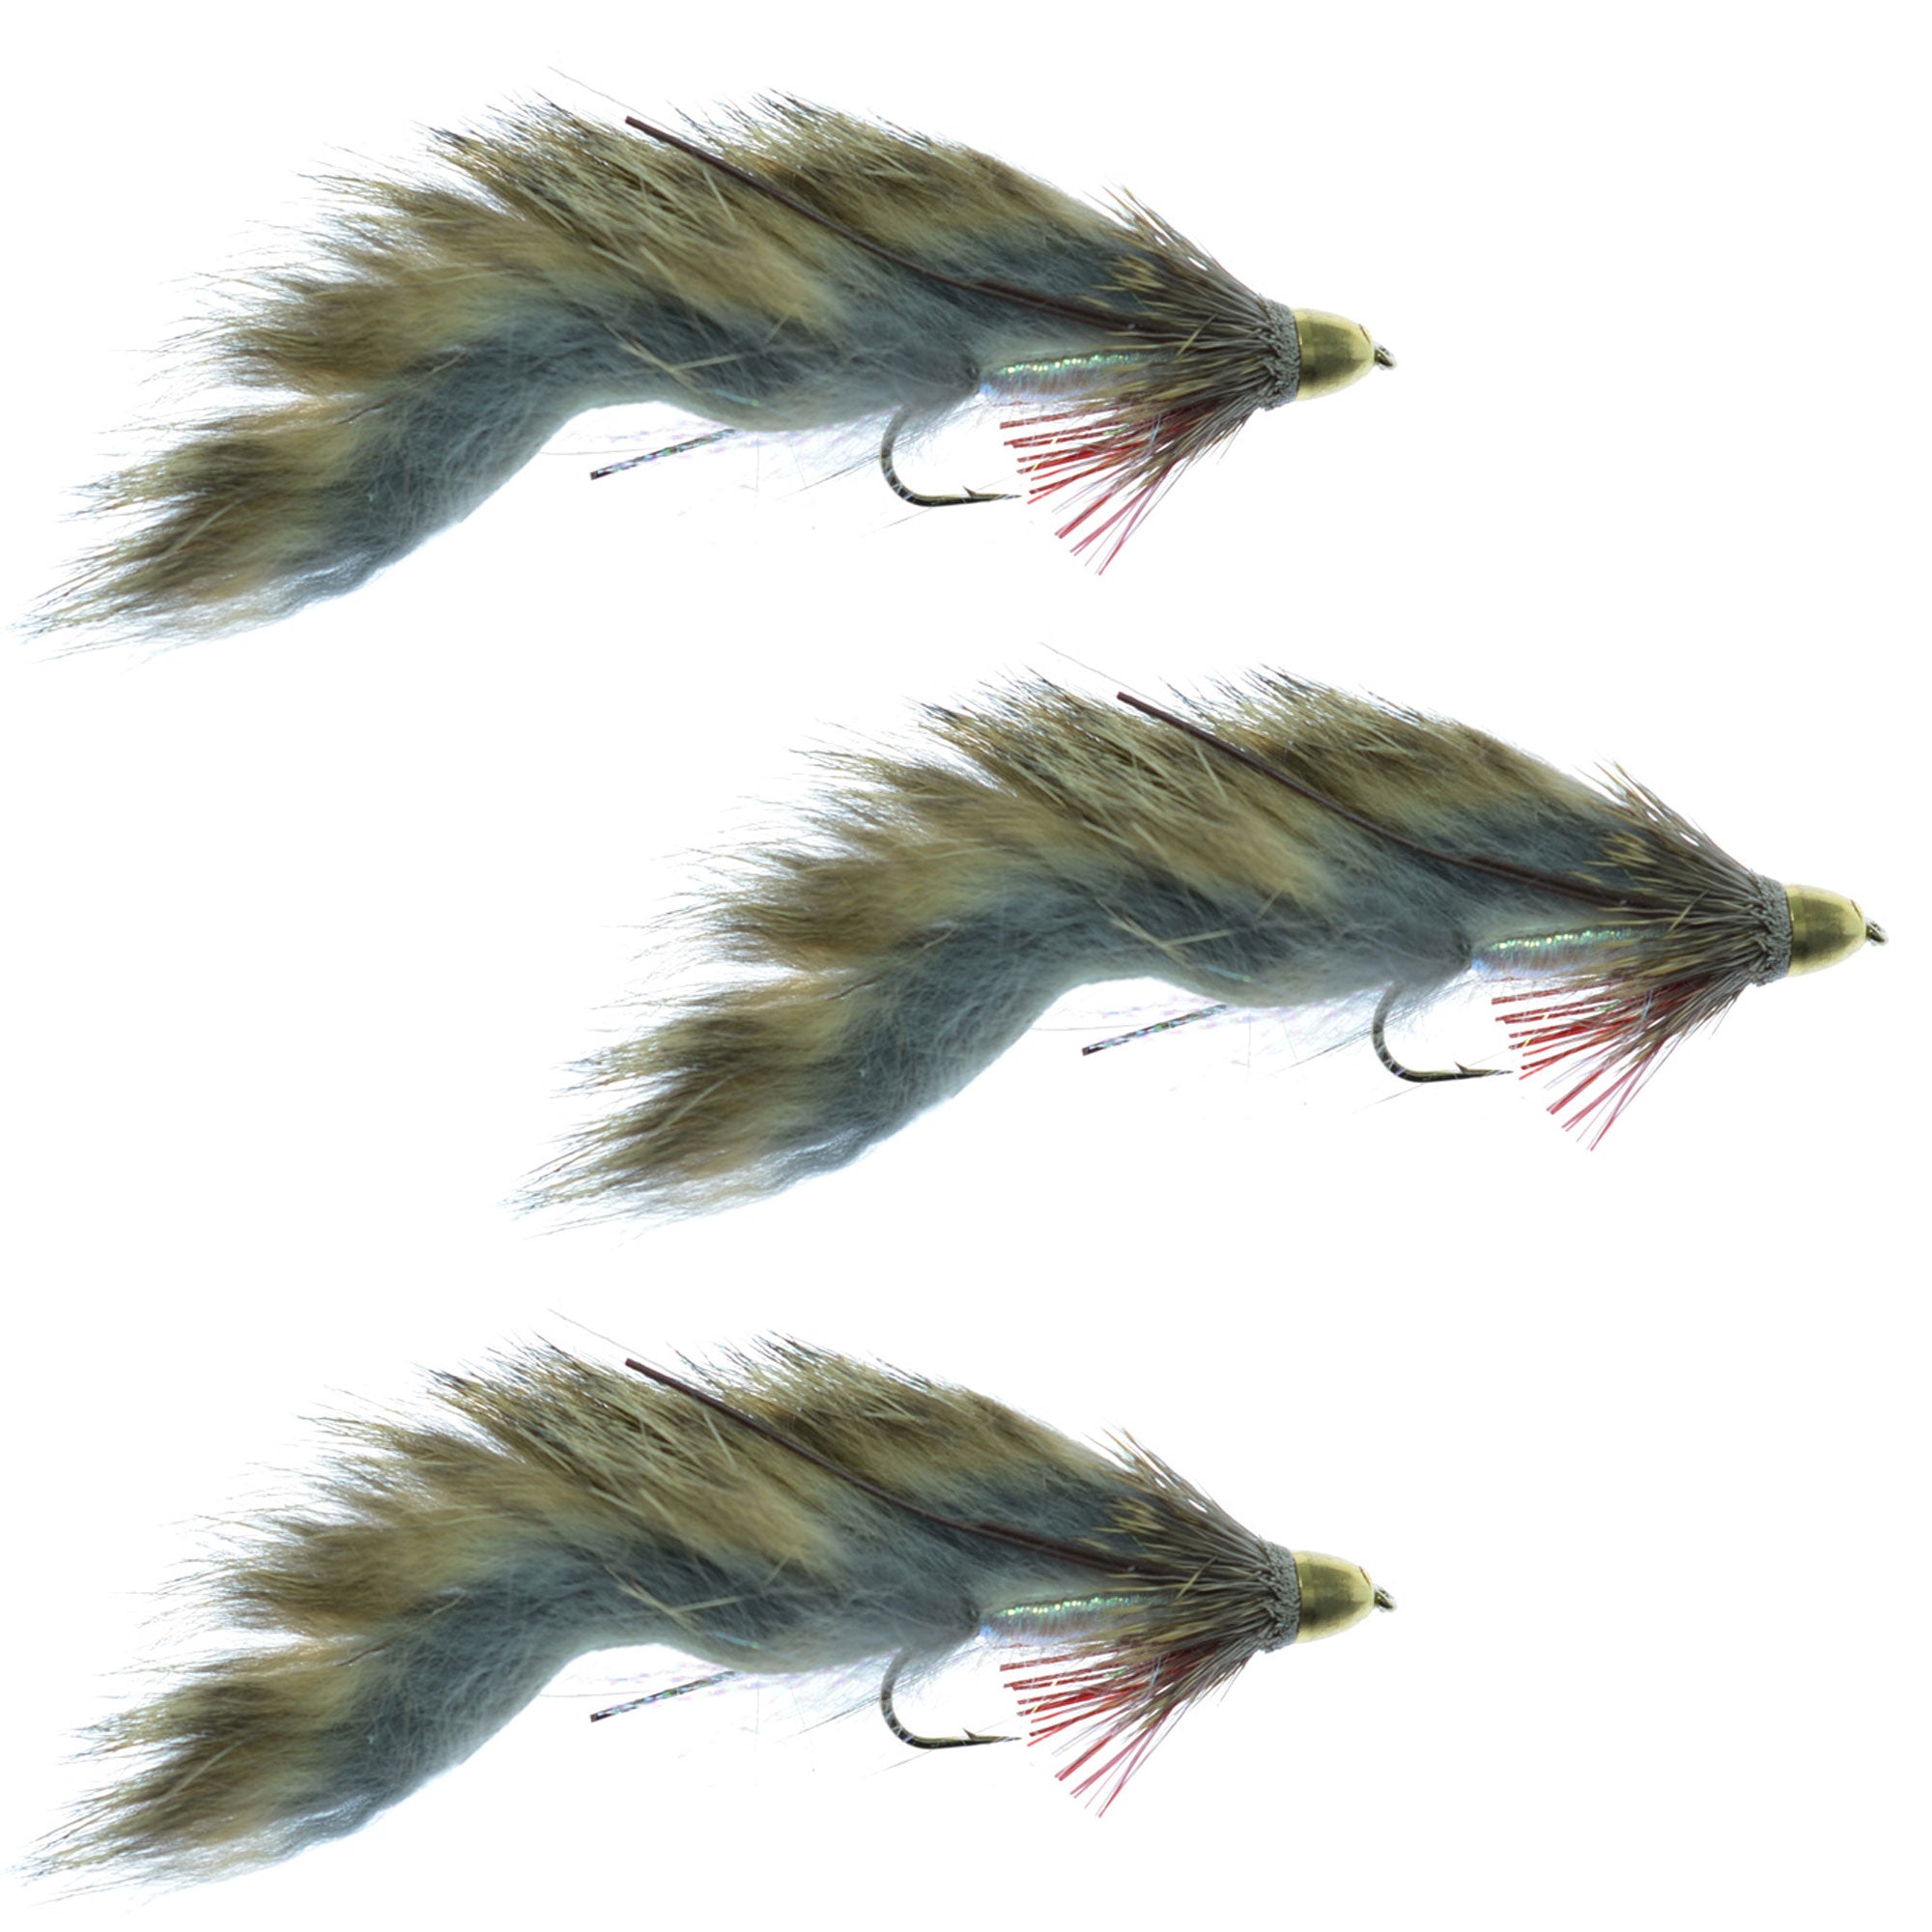 3 Pack ConeHead Zuddler Trout and Bass Streamer Fly -Lunchables - Natural - Hook Size 4